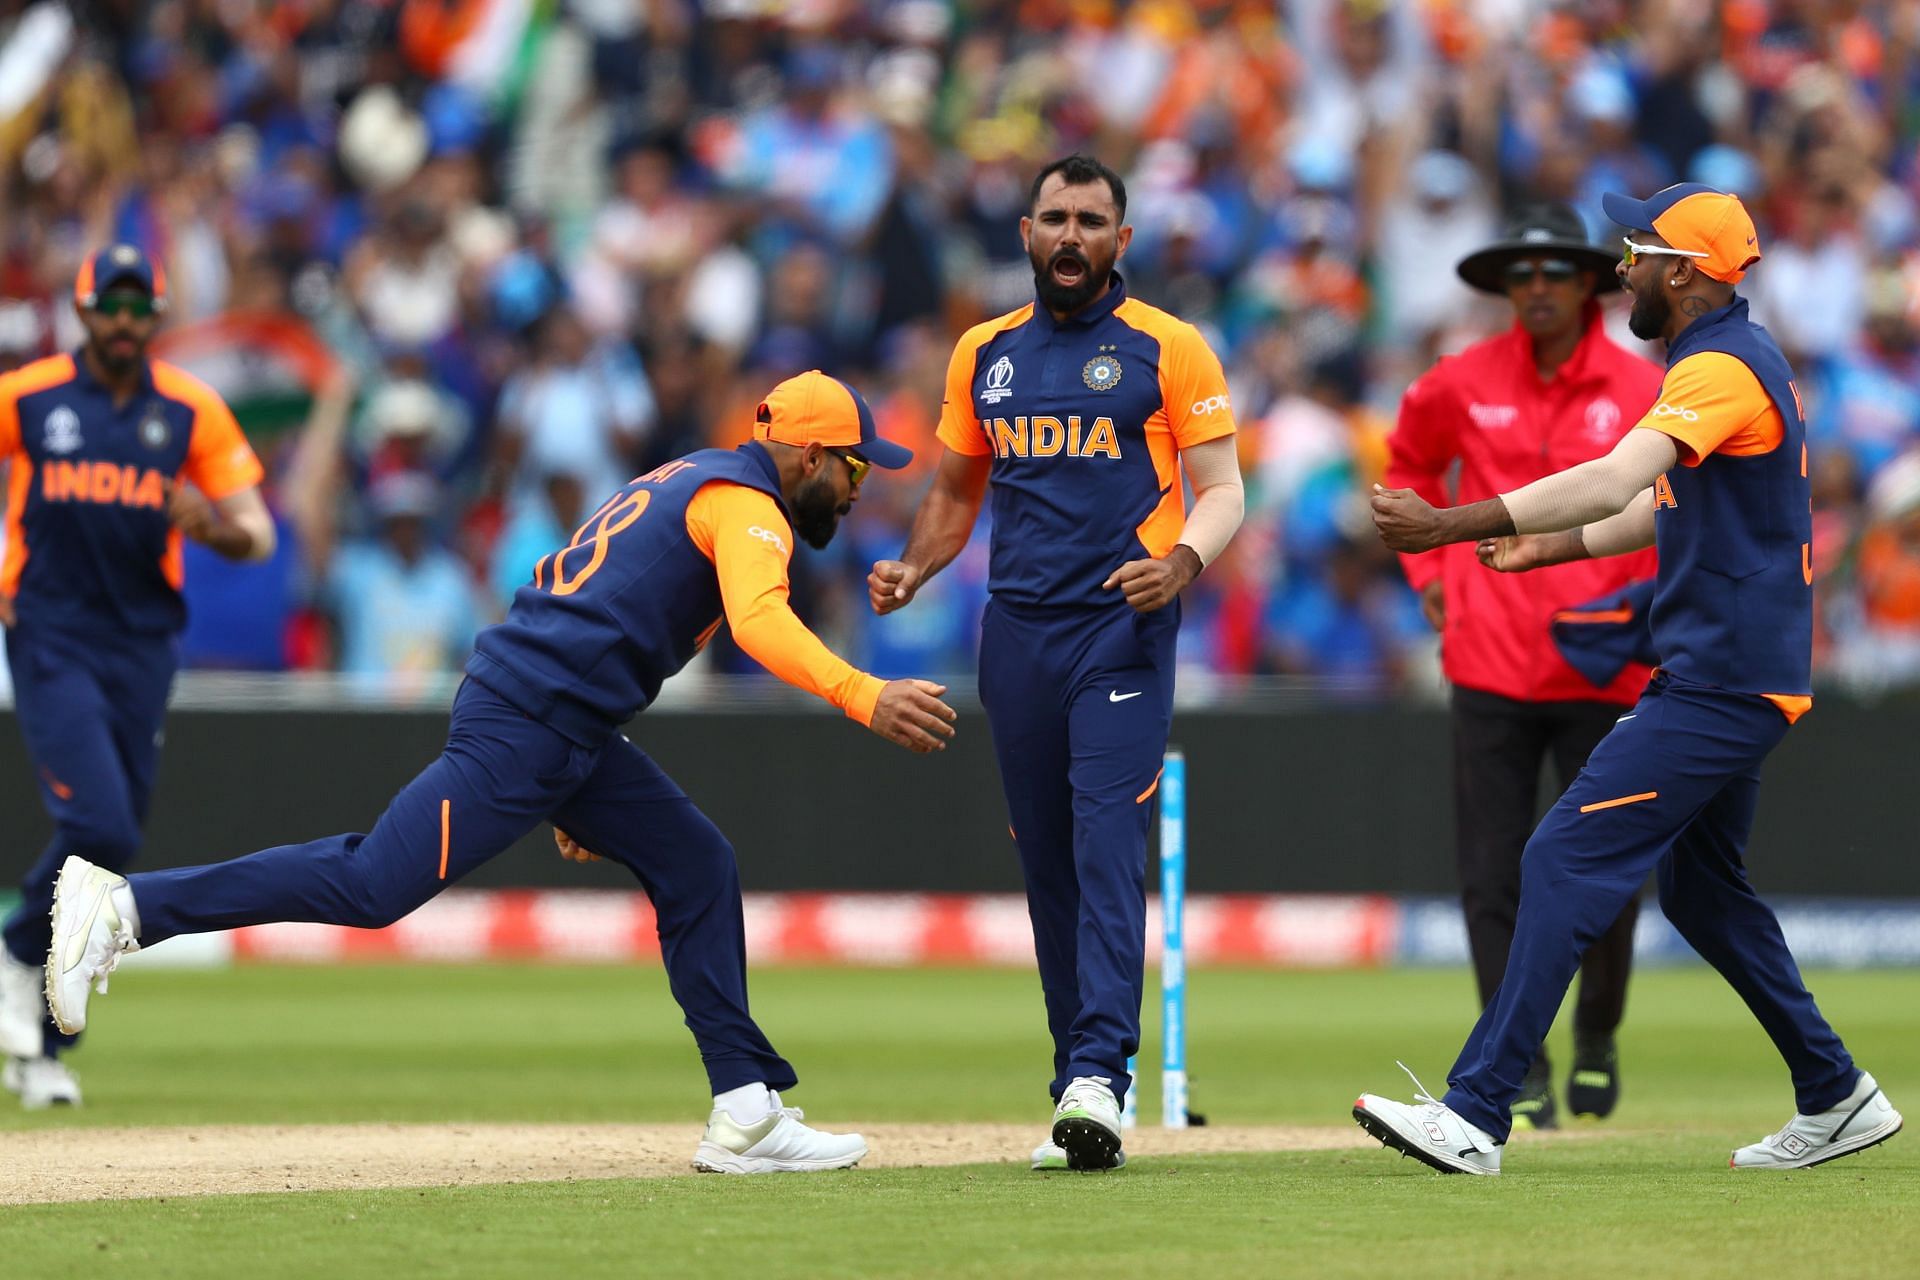 Mohammed Shami had a good outing in the 2019 World Cup